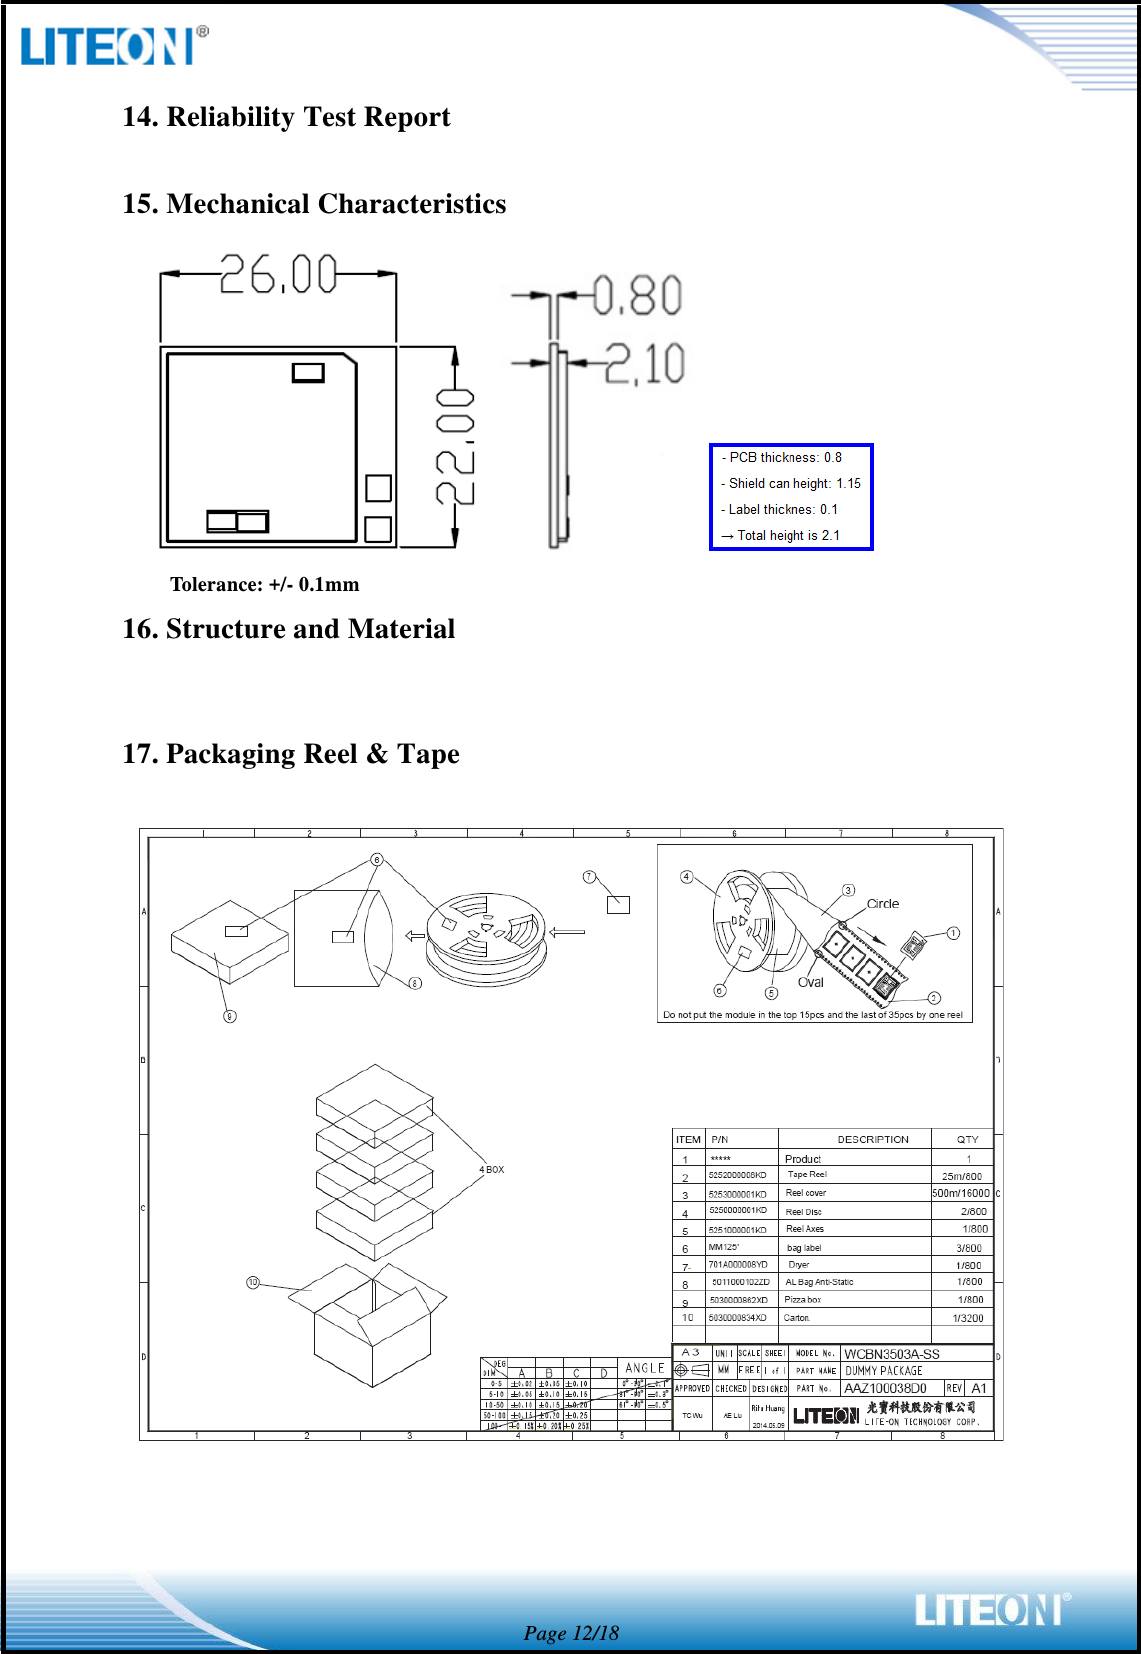  Page 12/18 14. Reliability Test Report    15. Mechanical Characteristics  Tolerance: +/- 0.1mm 16. Structure and Material   17. Packaging Reel &amp; Tape    